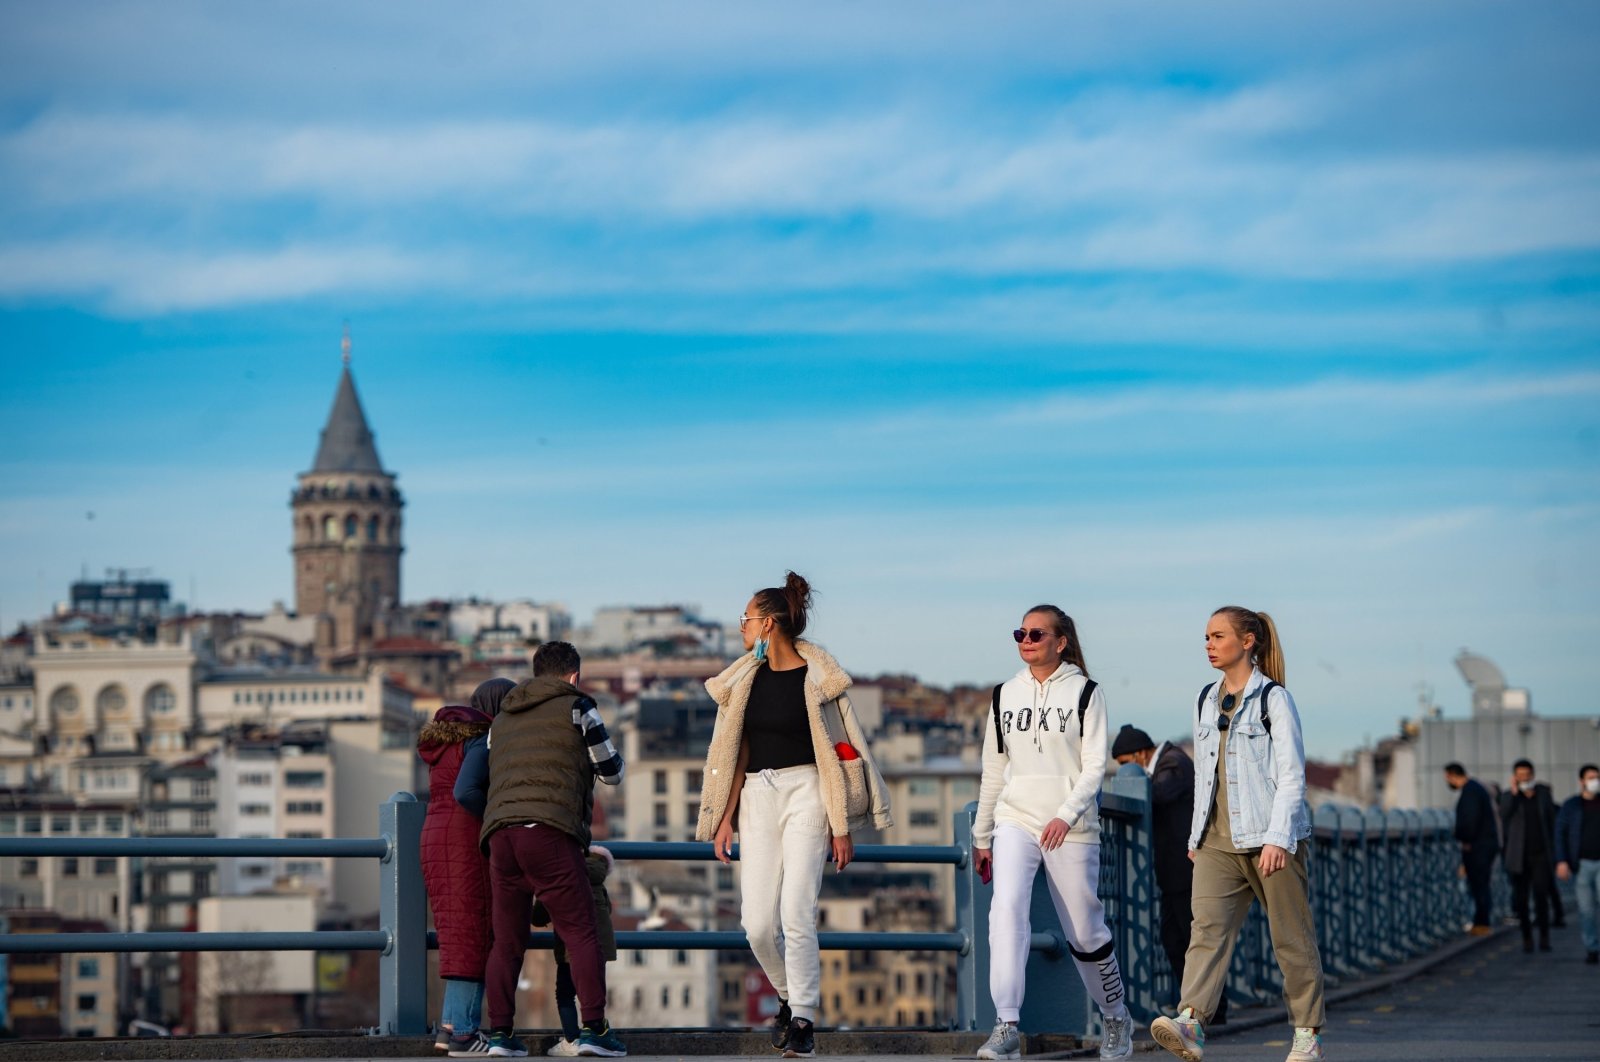 Tourists walk near Galata Bridge during a two-day curfew to limit the spread of COVID-19 in Istanbul, Turkey, Jan. 31, 2021. (AFP Photo)